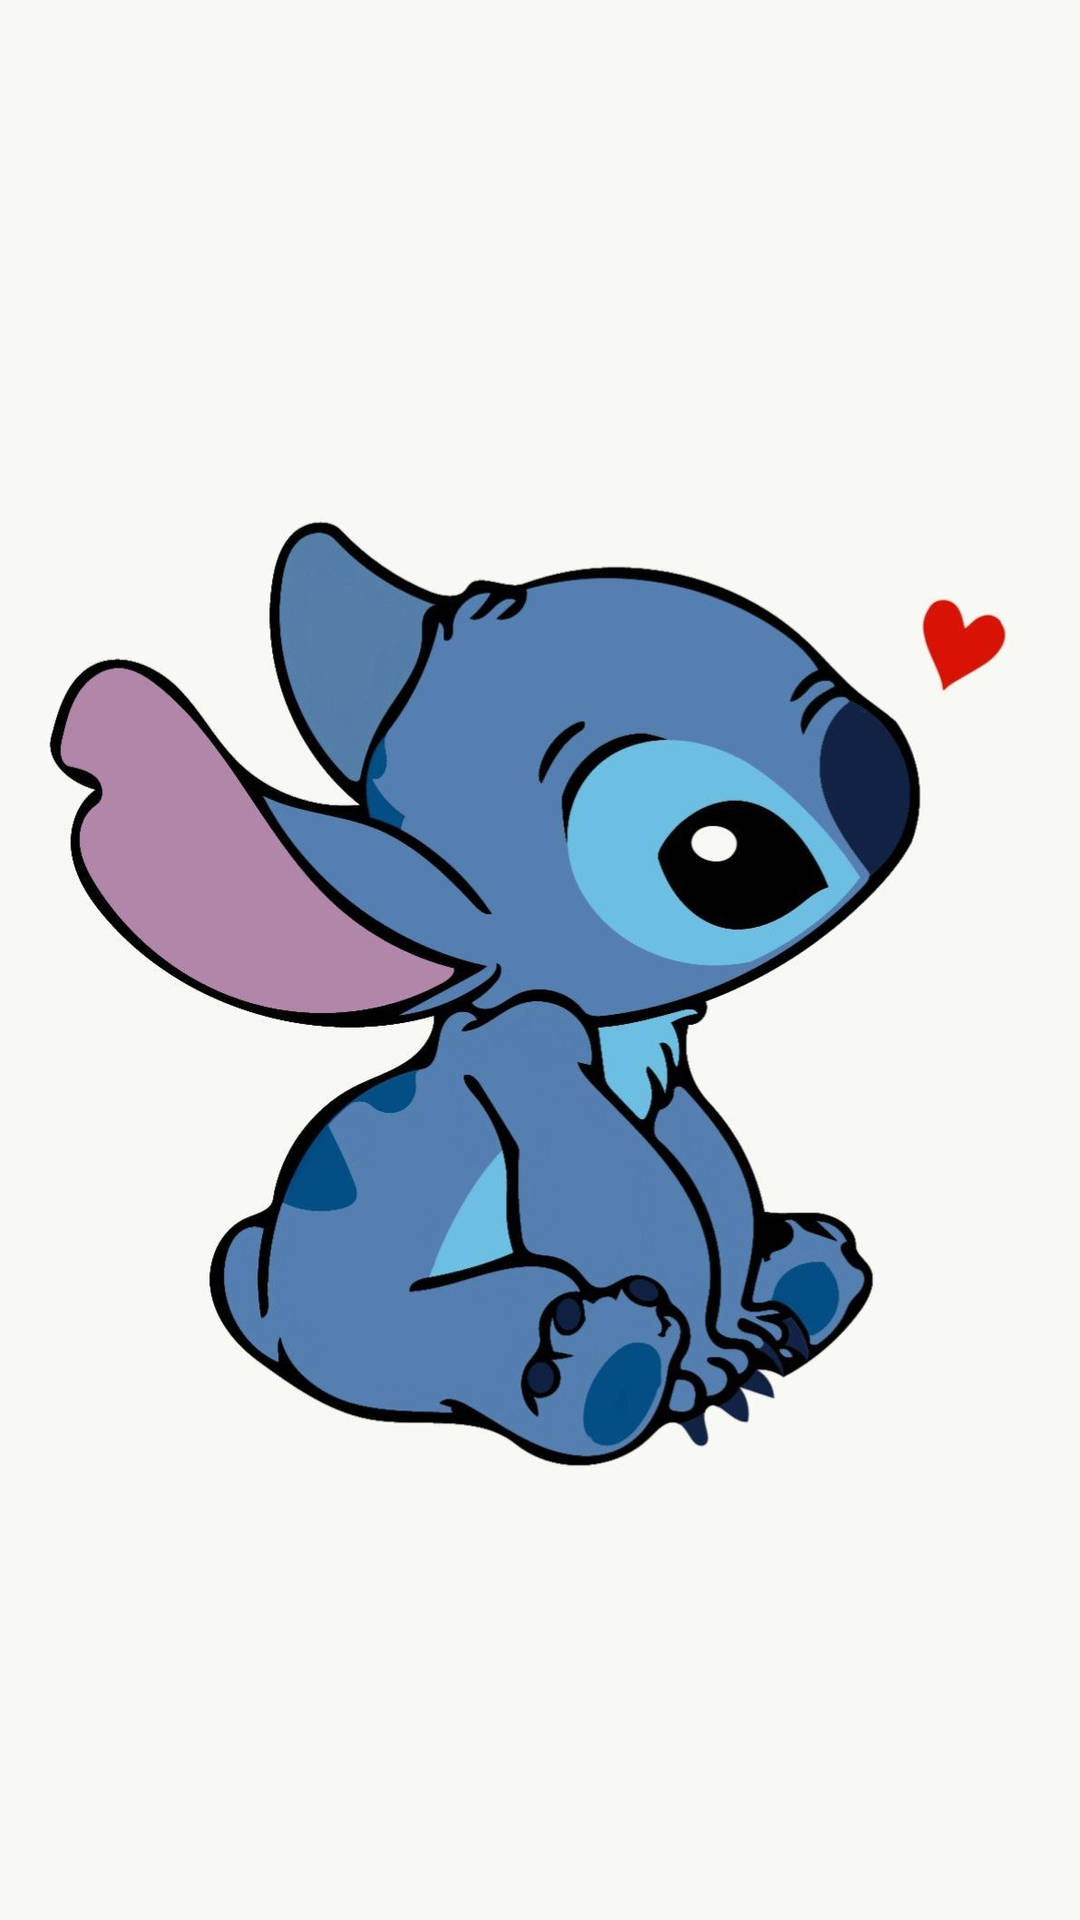 Stitch with a small red heart wallpaper.